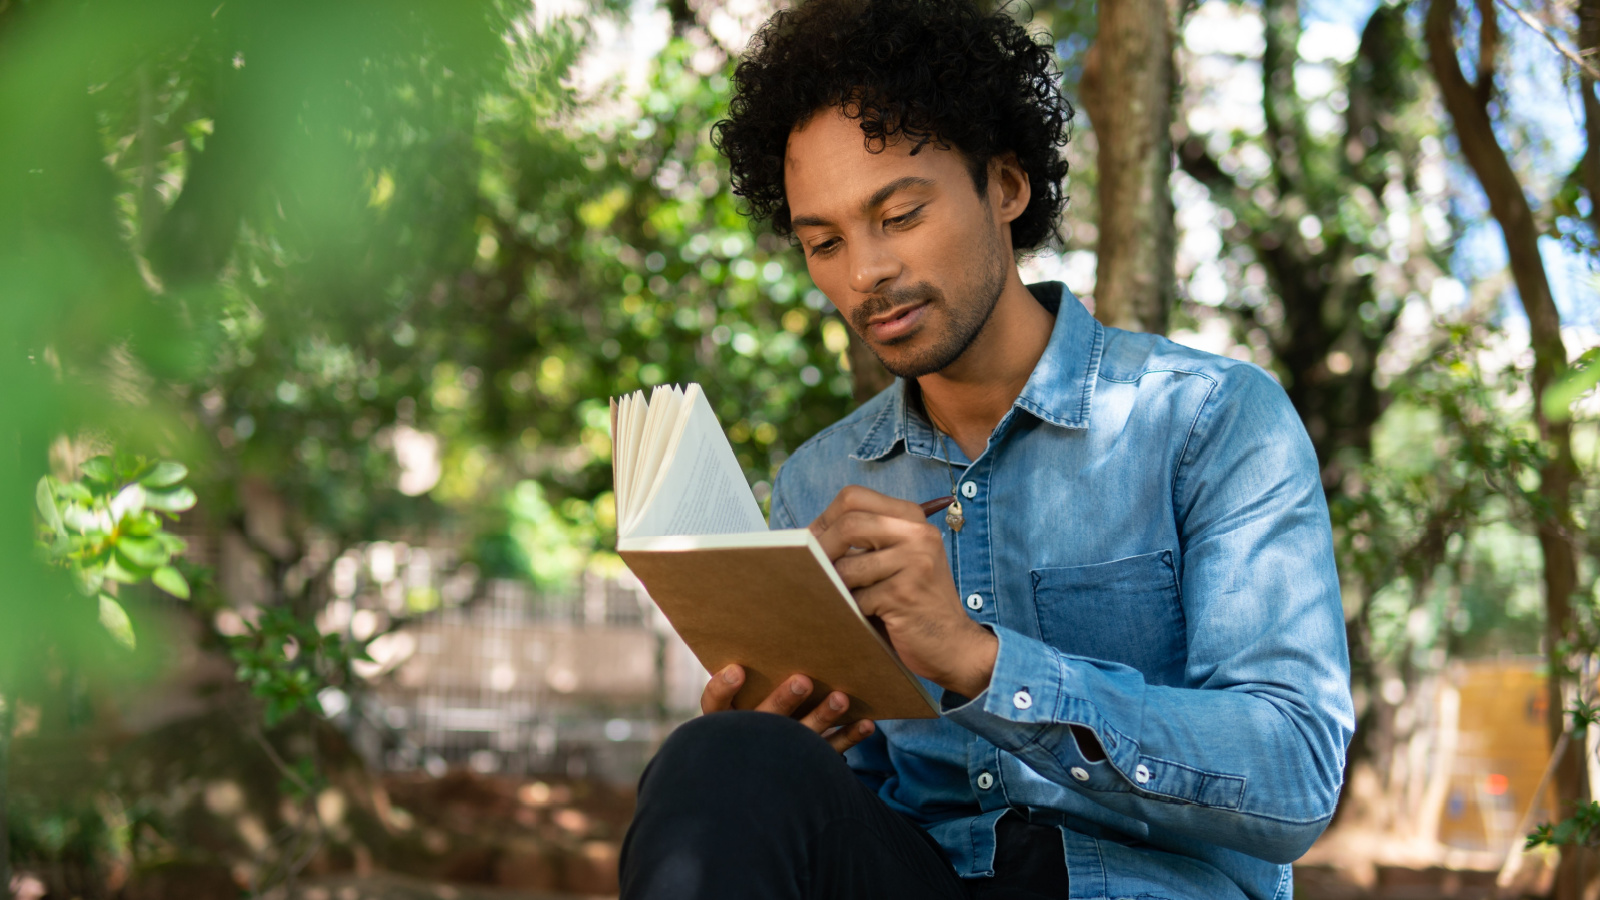 image credit: Vergani-Fotografia/Shutterstock <p><span>Writing down your thoughts can be a therapeutic way to process your feelings about the political climate. It’s a private space to vent frustrations, fears, and hopes. Journaling can also help you track your emotional responses over time. “Writing has been my outlet in these turbulent political times,” says a journal enthusiast.</span></p>